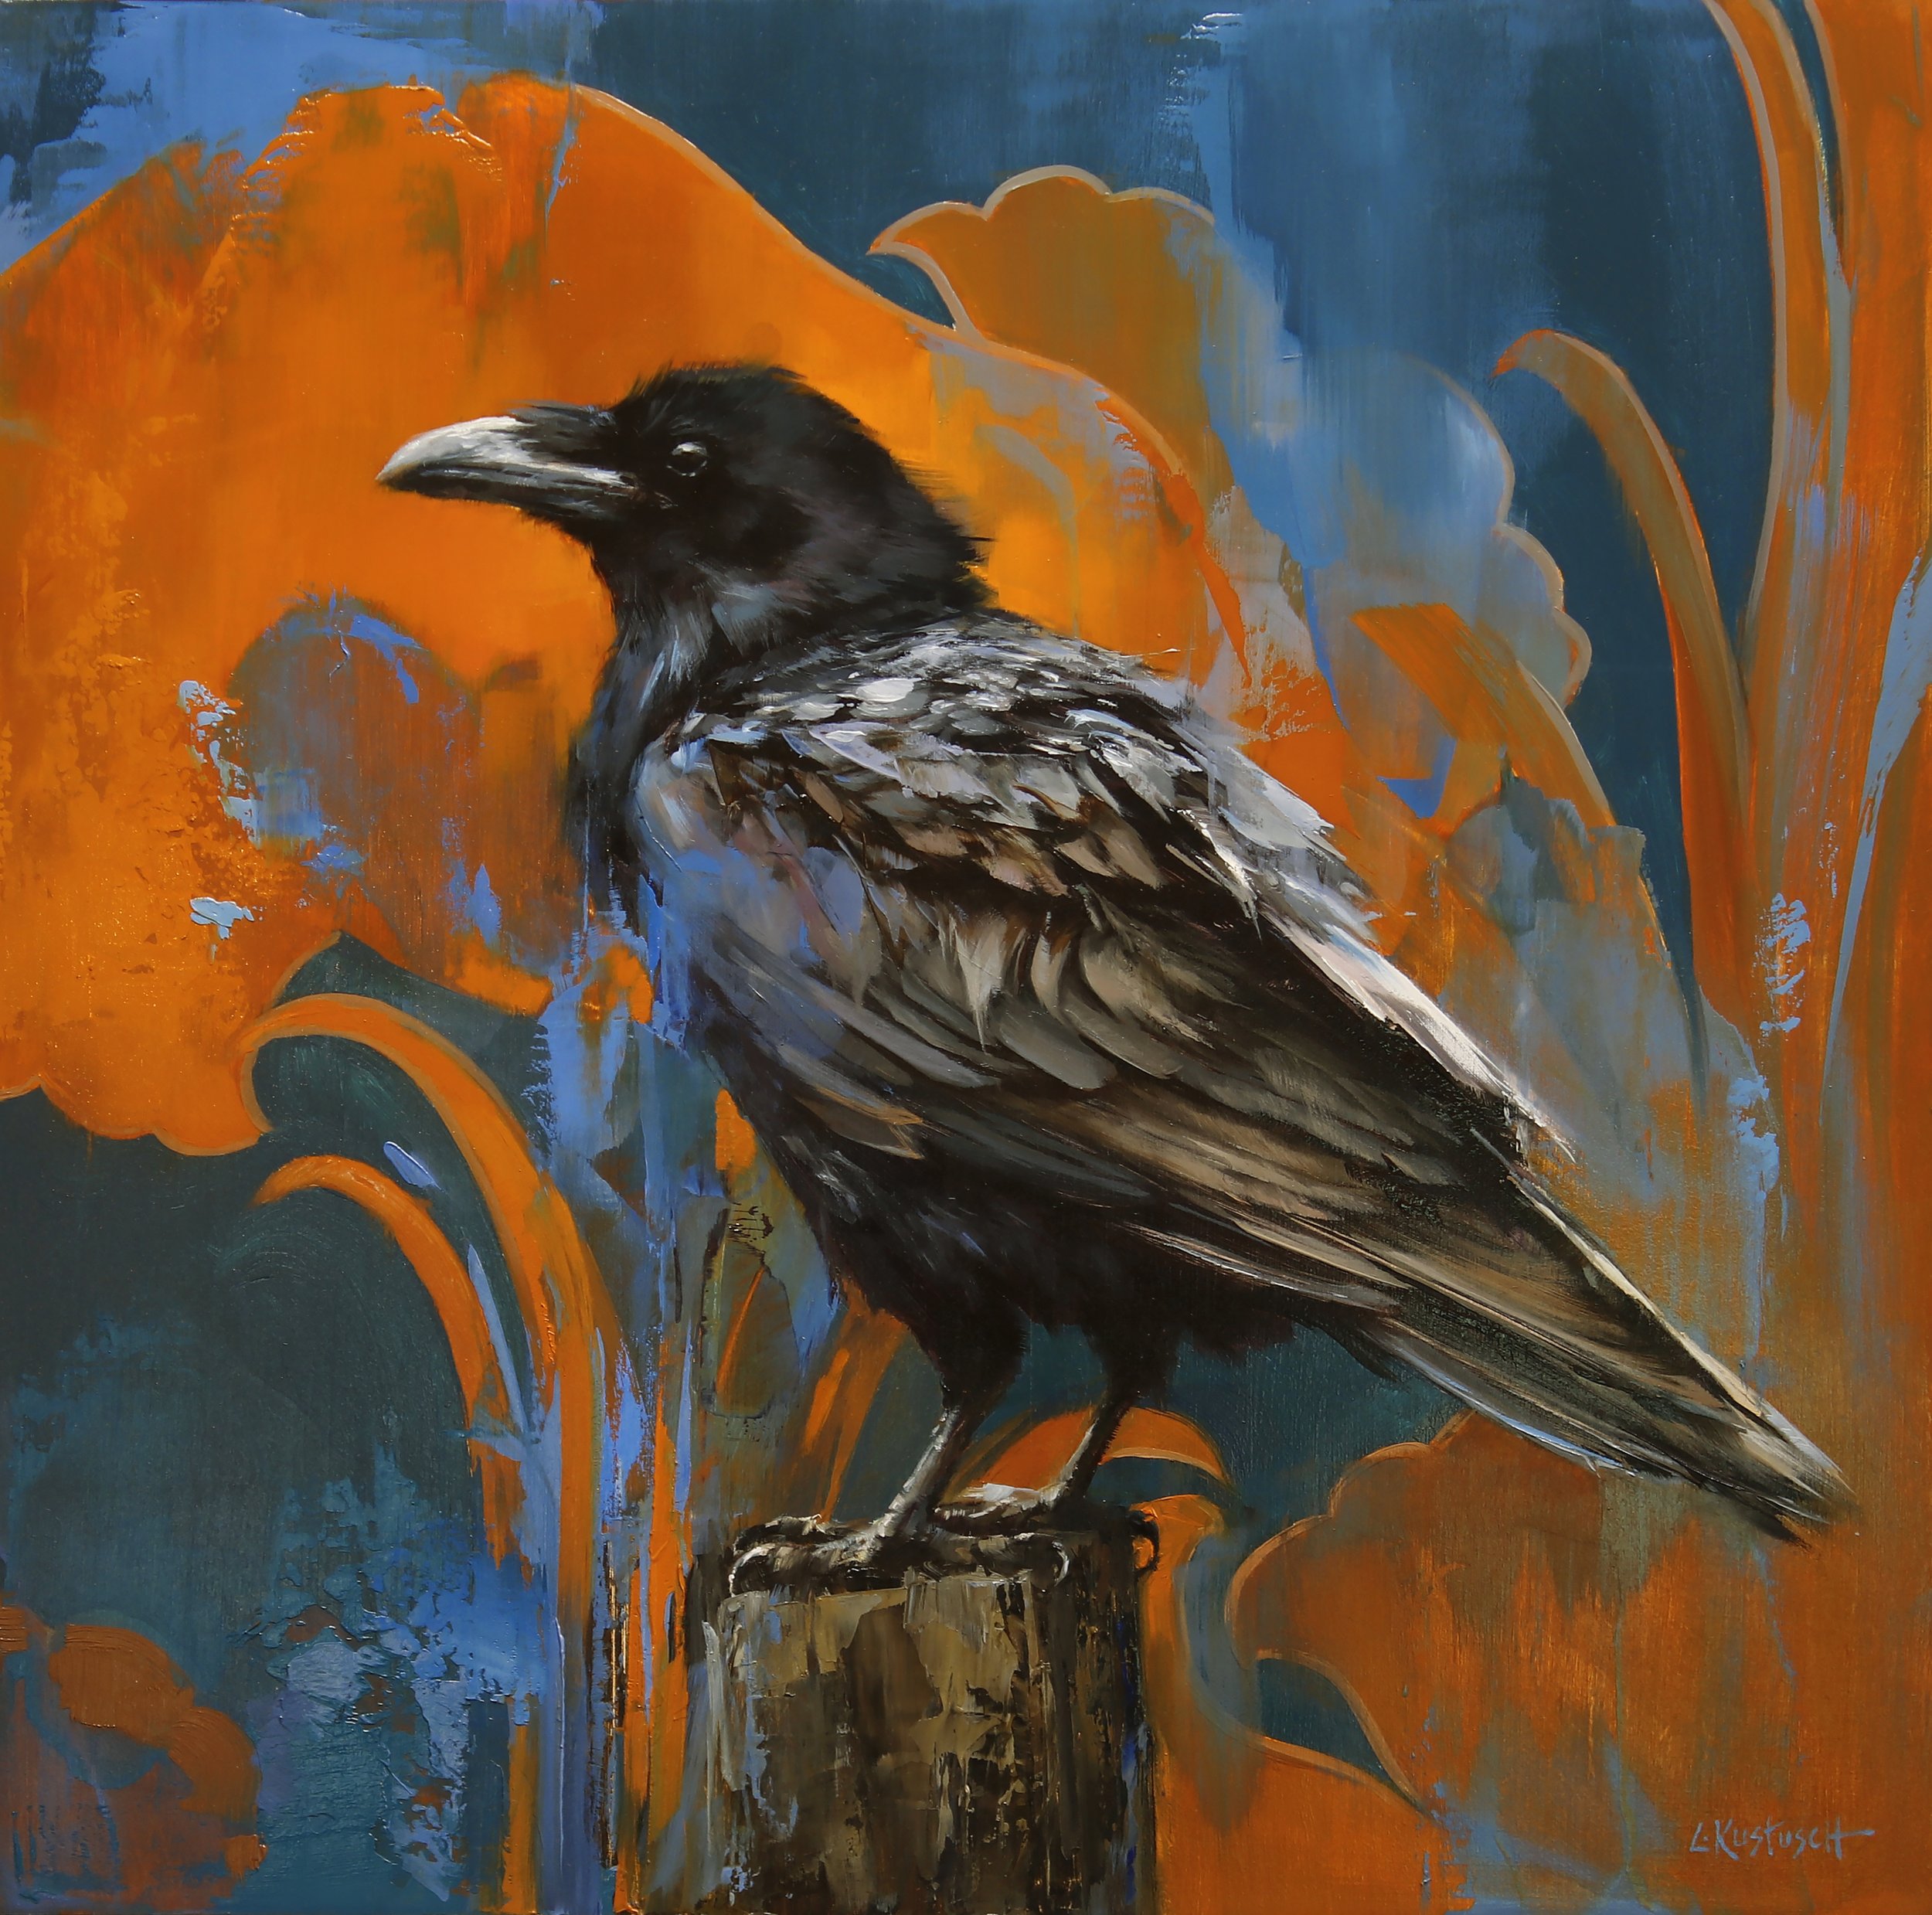 Raven in Shades of Amber & Teal by Lindsey Kustusch